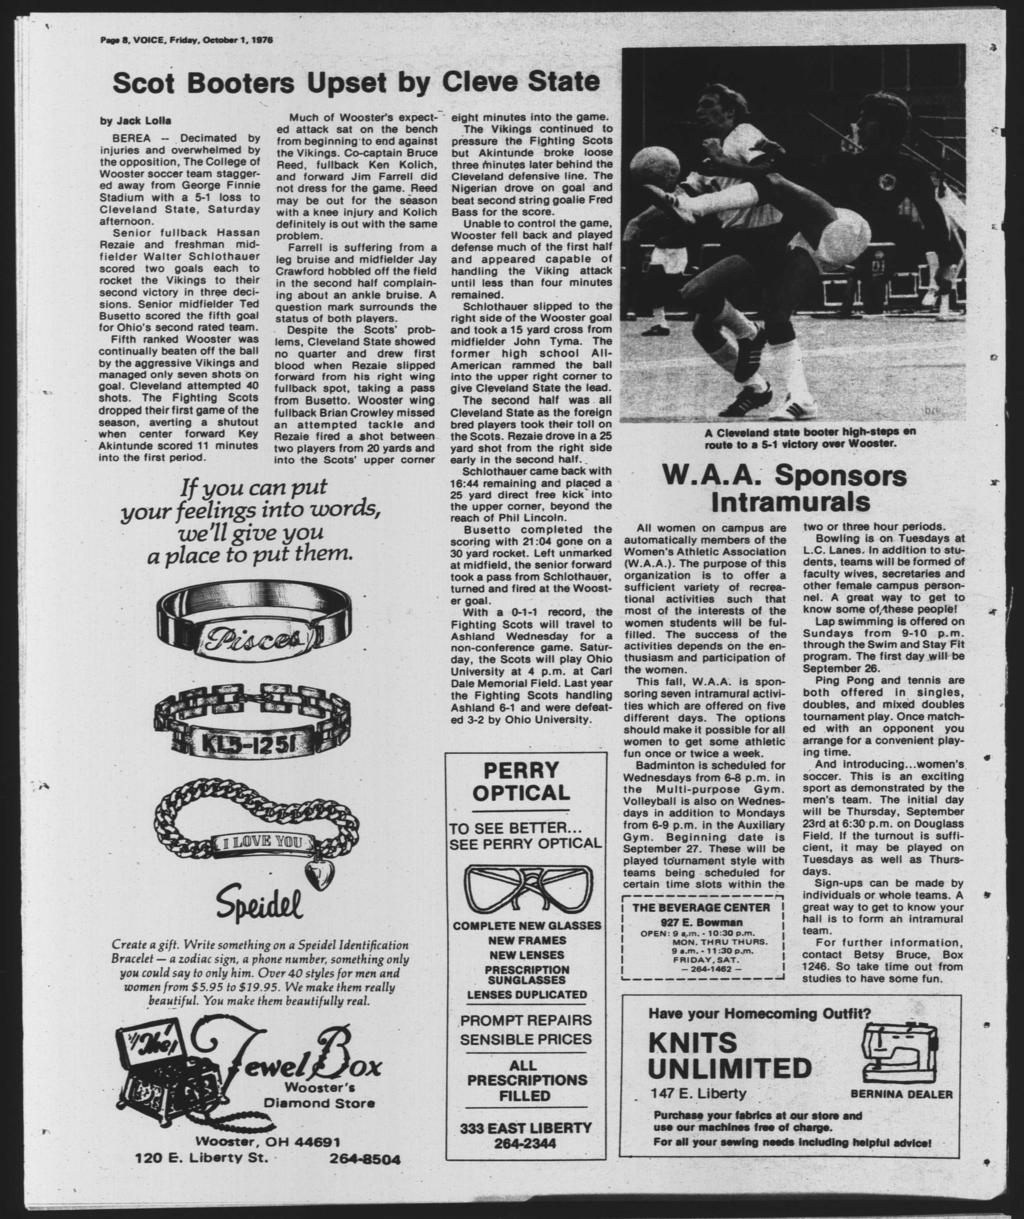 Pag 8, VOCE, Frday, October, 976 Scot Booters Upset by Ceve State by Jack Lolla BEREA Decmated by njures and overwhelmed by the opposton, The College of Wooster soccer team staggered away from George